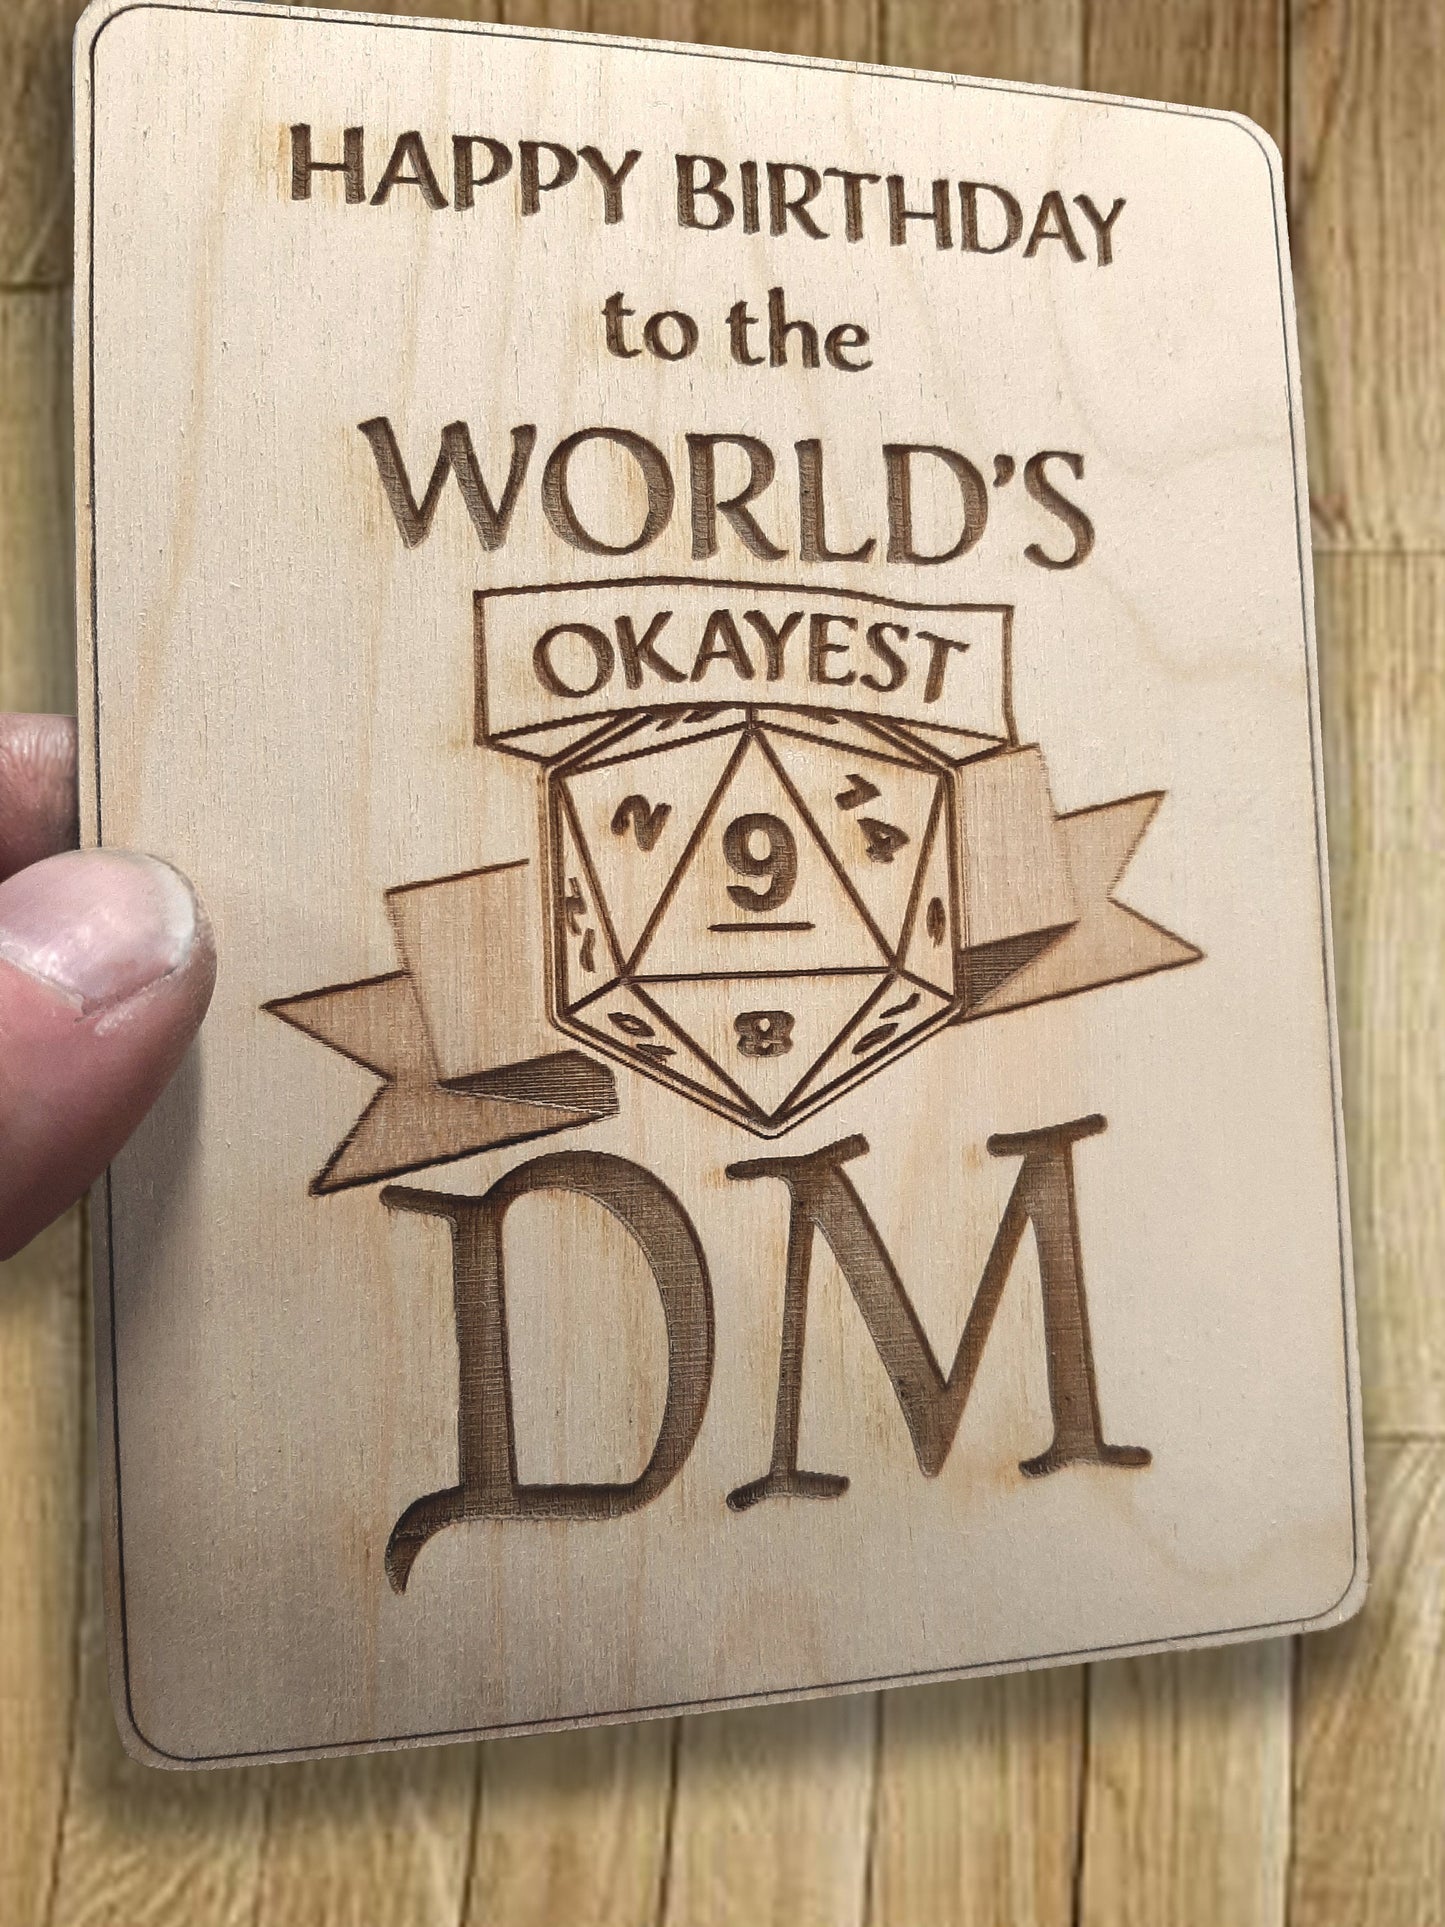 Happy Birthday to the World's OKAYEST DM - Birthday Card - Humorous birthday card, engraved wood, rpg gamer gift, role-playing games d&d dnd